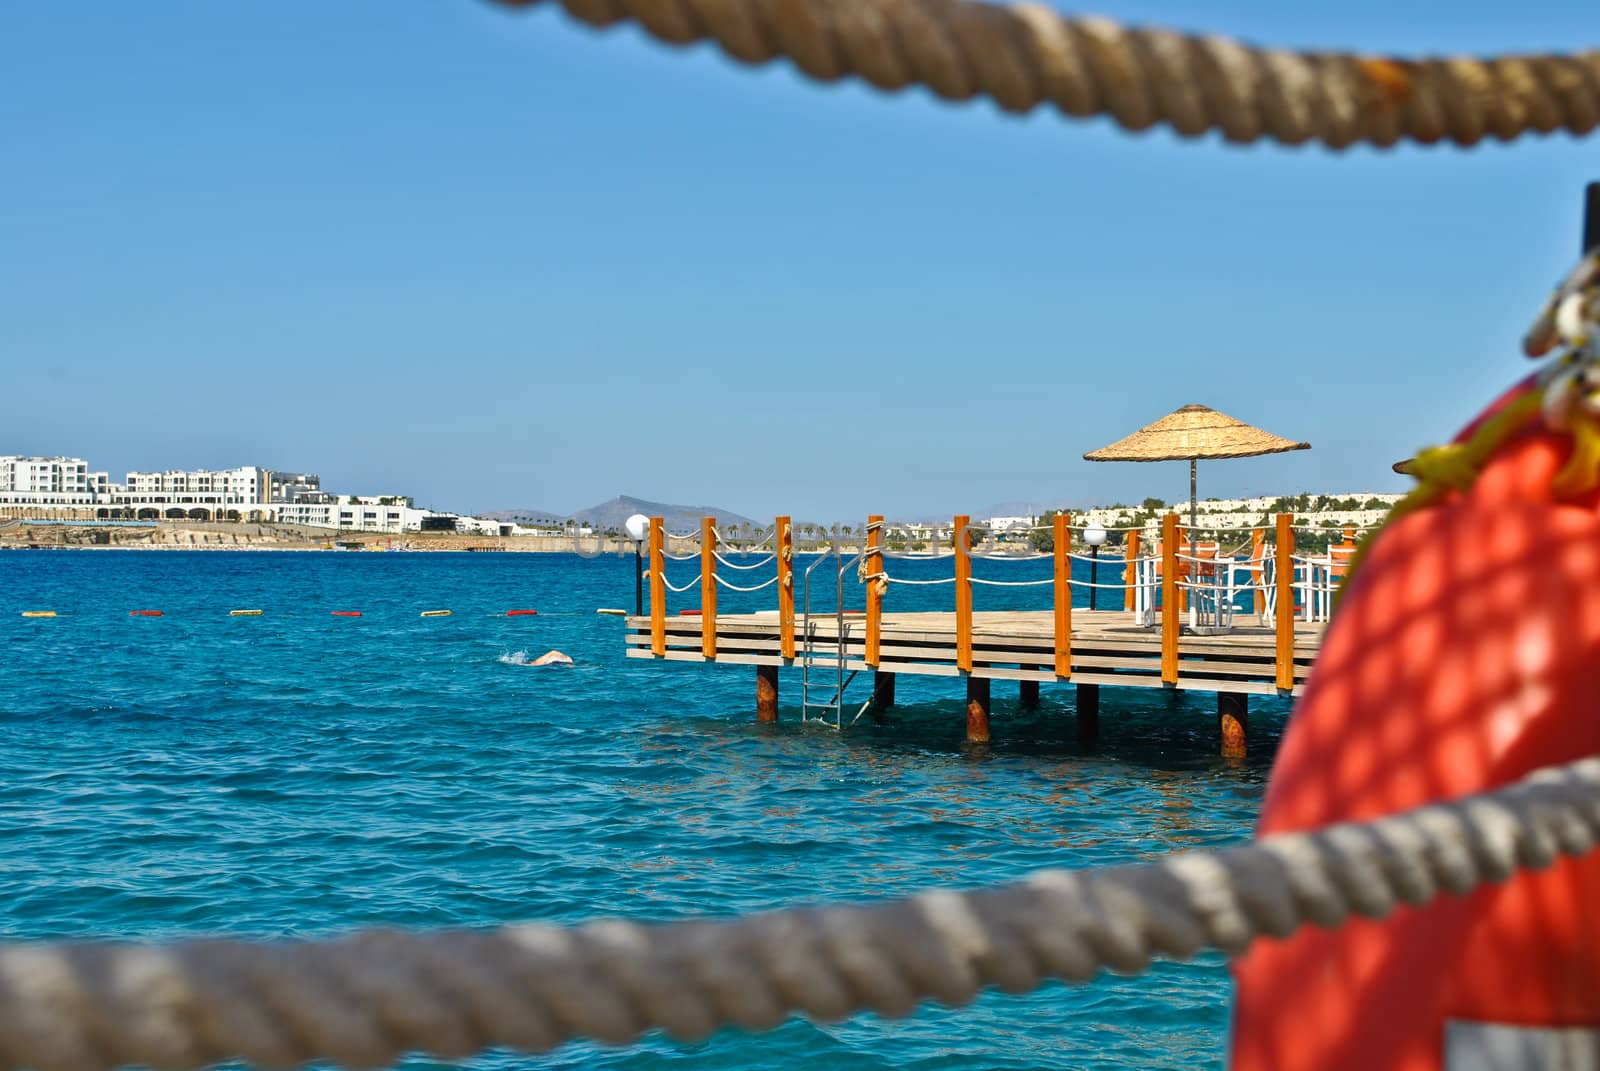 Wooden pontoon seen through two ropes, with blue water and an umbrella